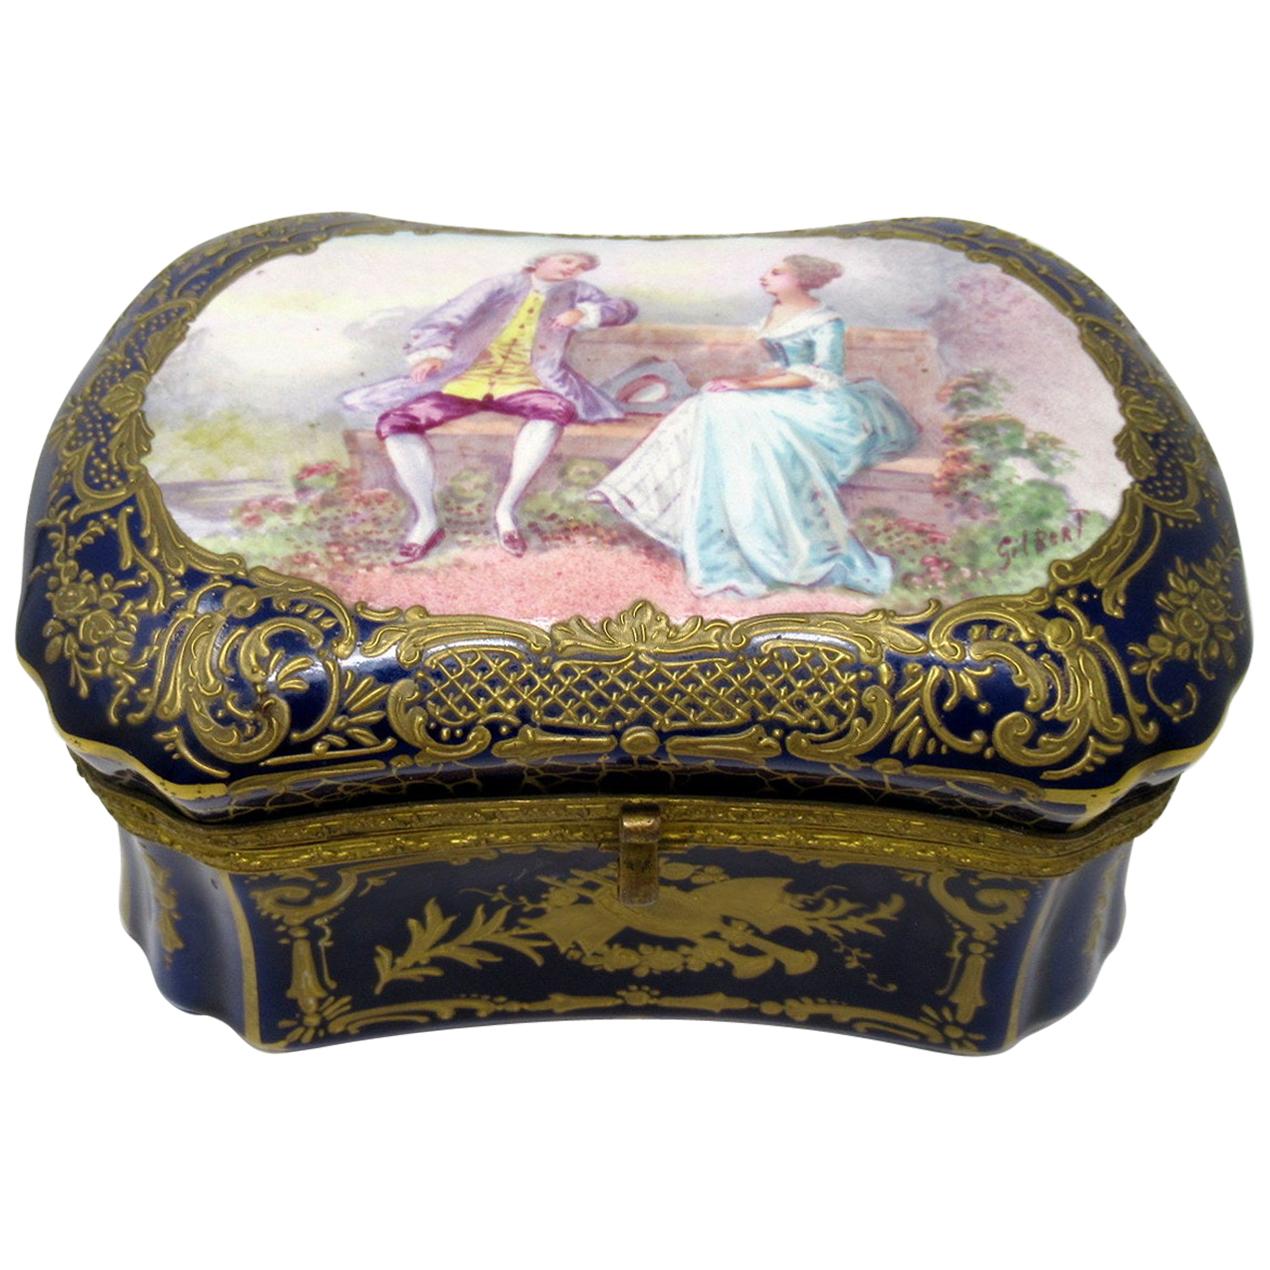 French Sevres Porcelain Hand Painted Jewelry Casket Ormolu Mounts Signed Gilbert